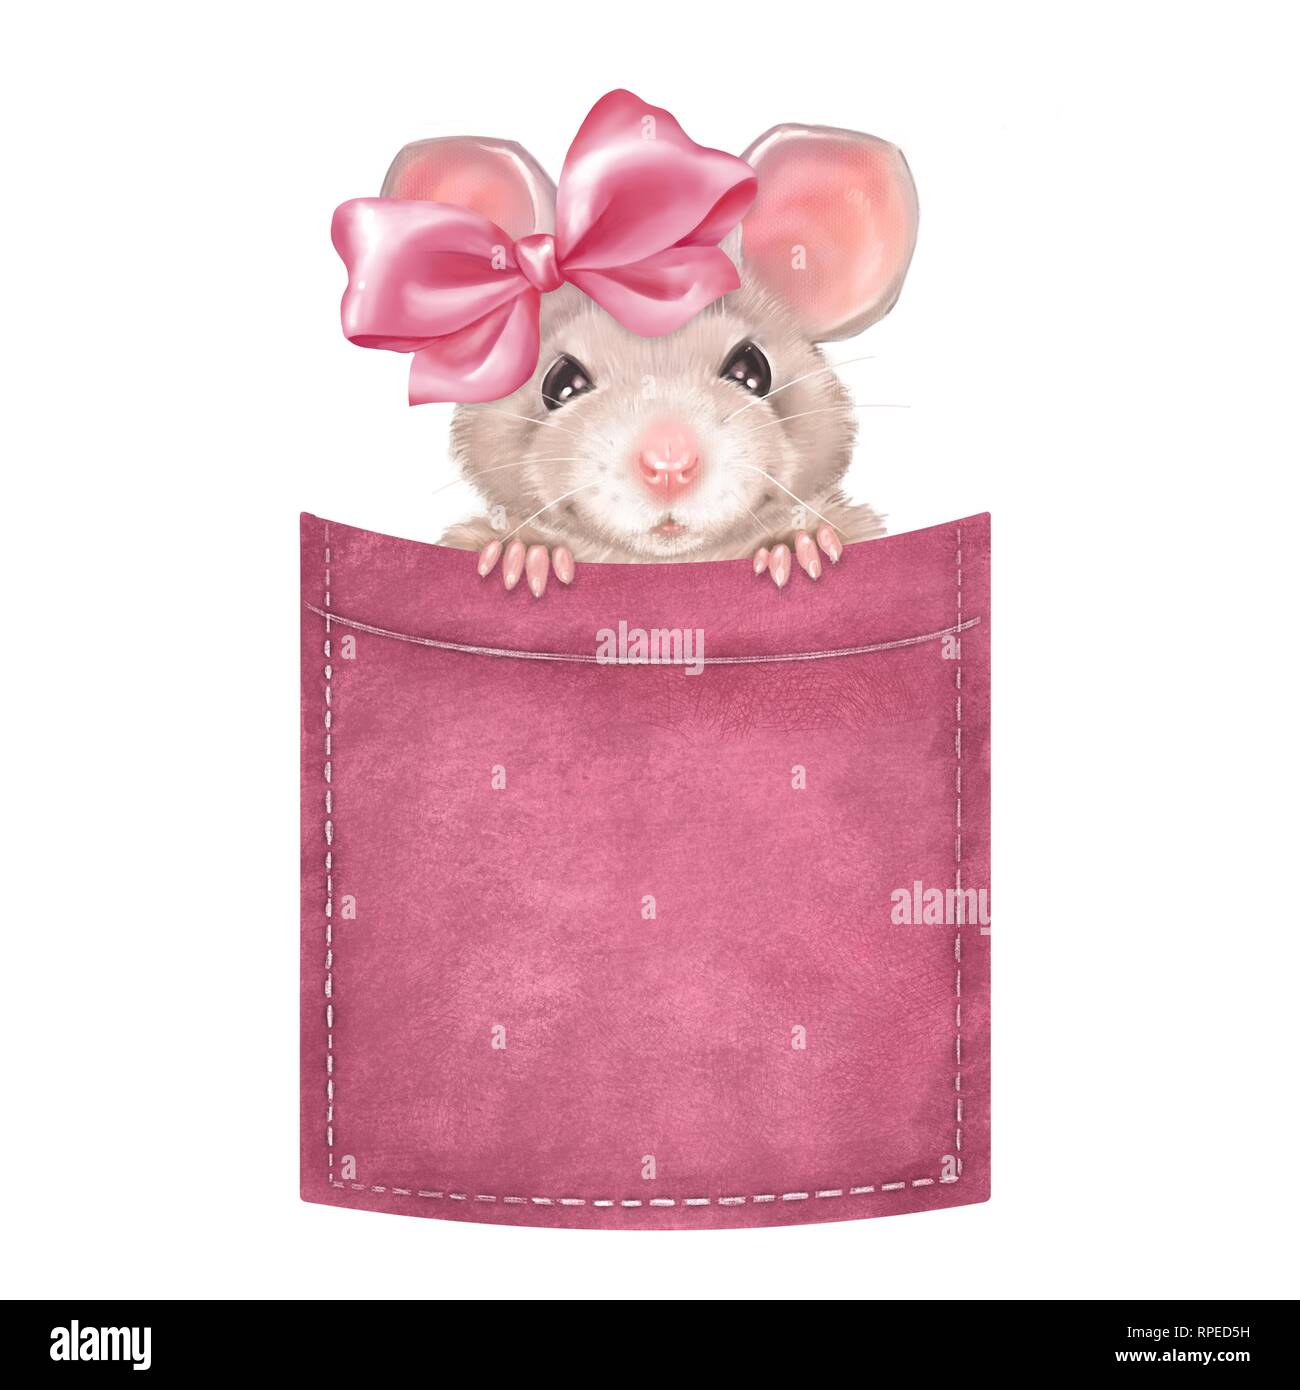 Cute mouse on pocket 2 Stock Photo